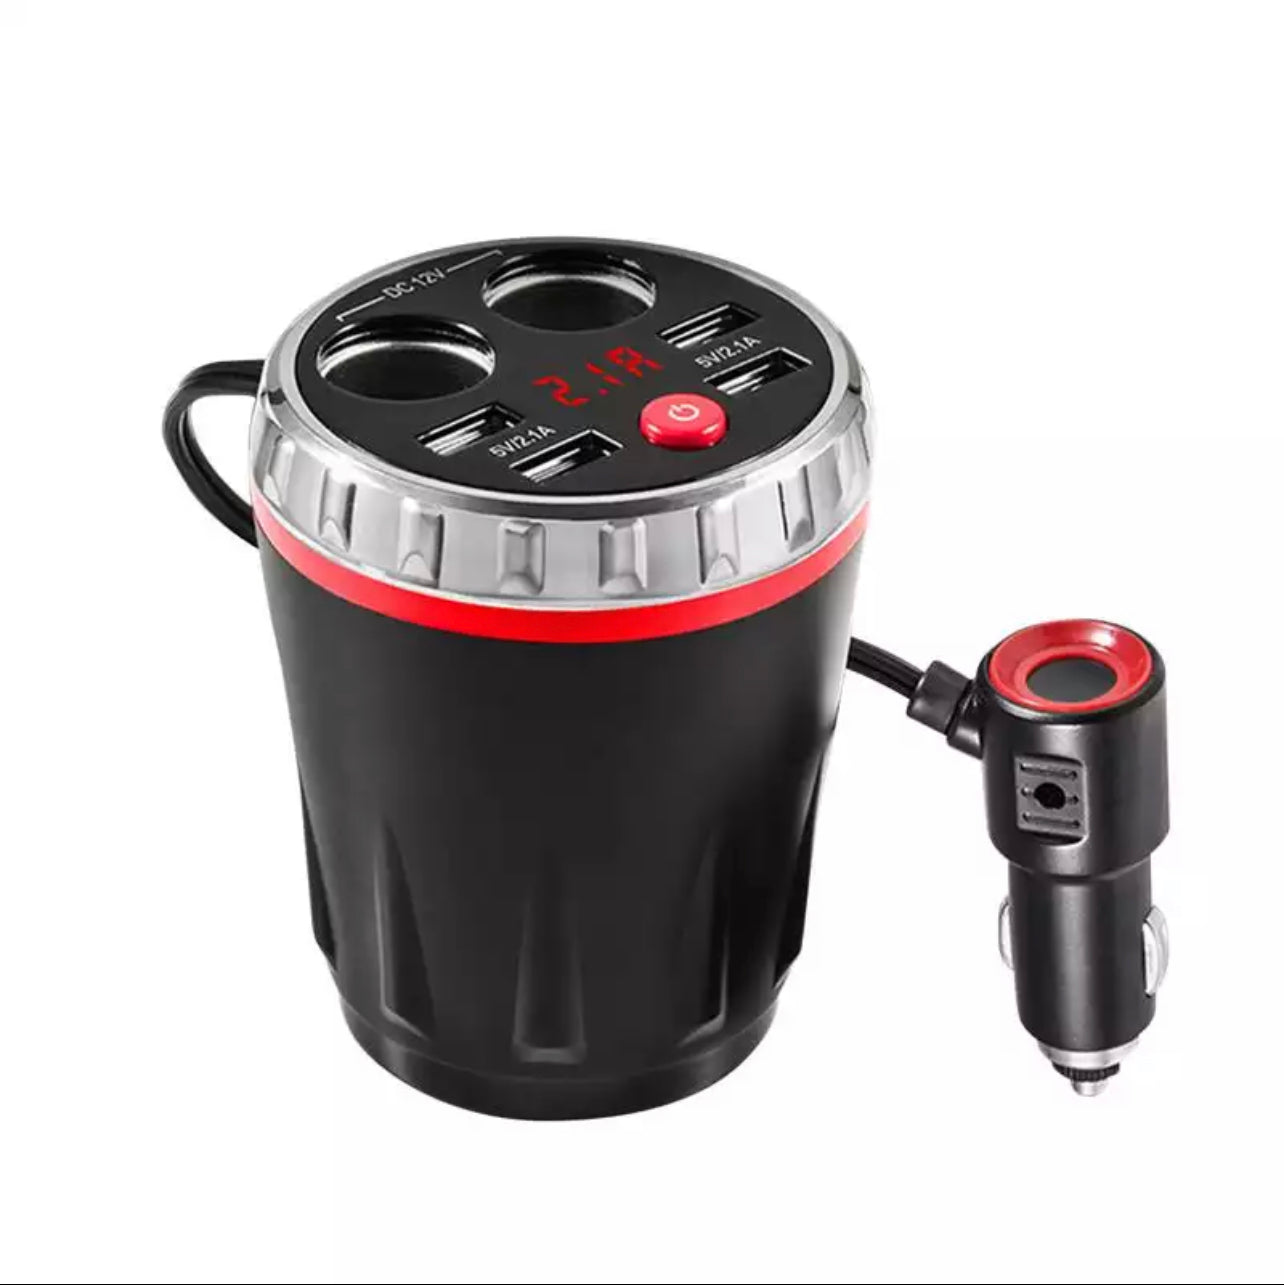 Car Charging cup - 4 USB Ports & Two Cigarette Sockets